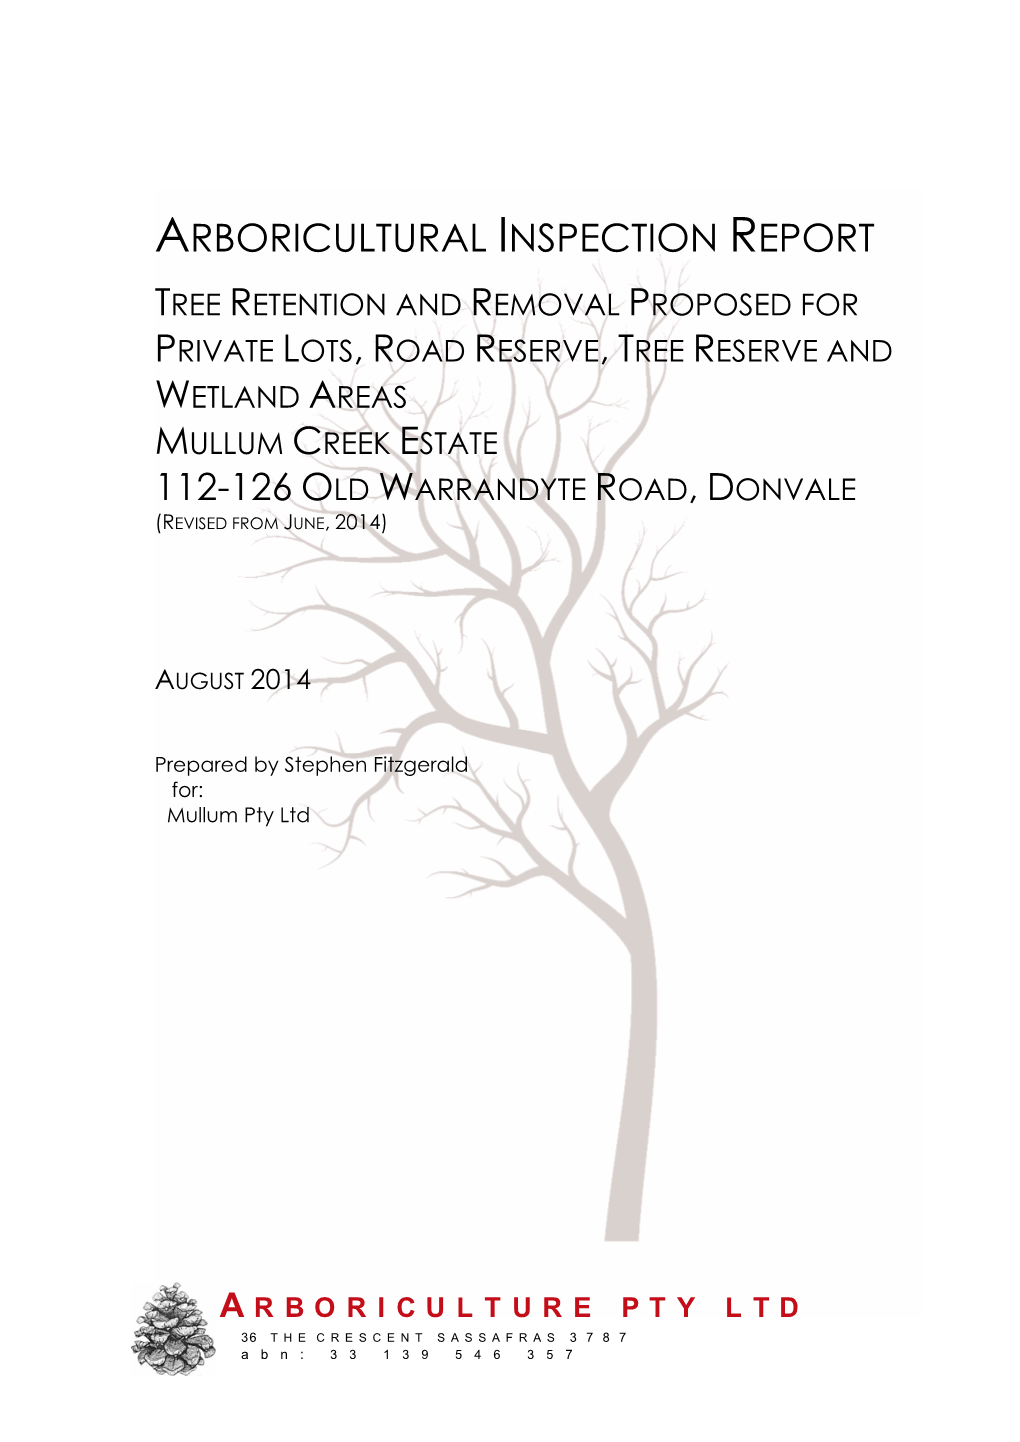 Aboricultural Inspection Report